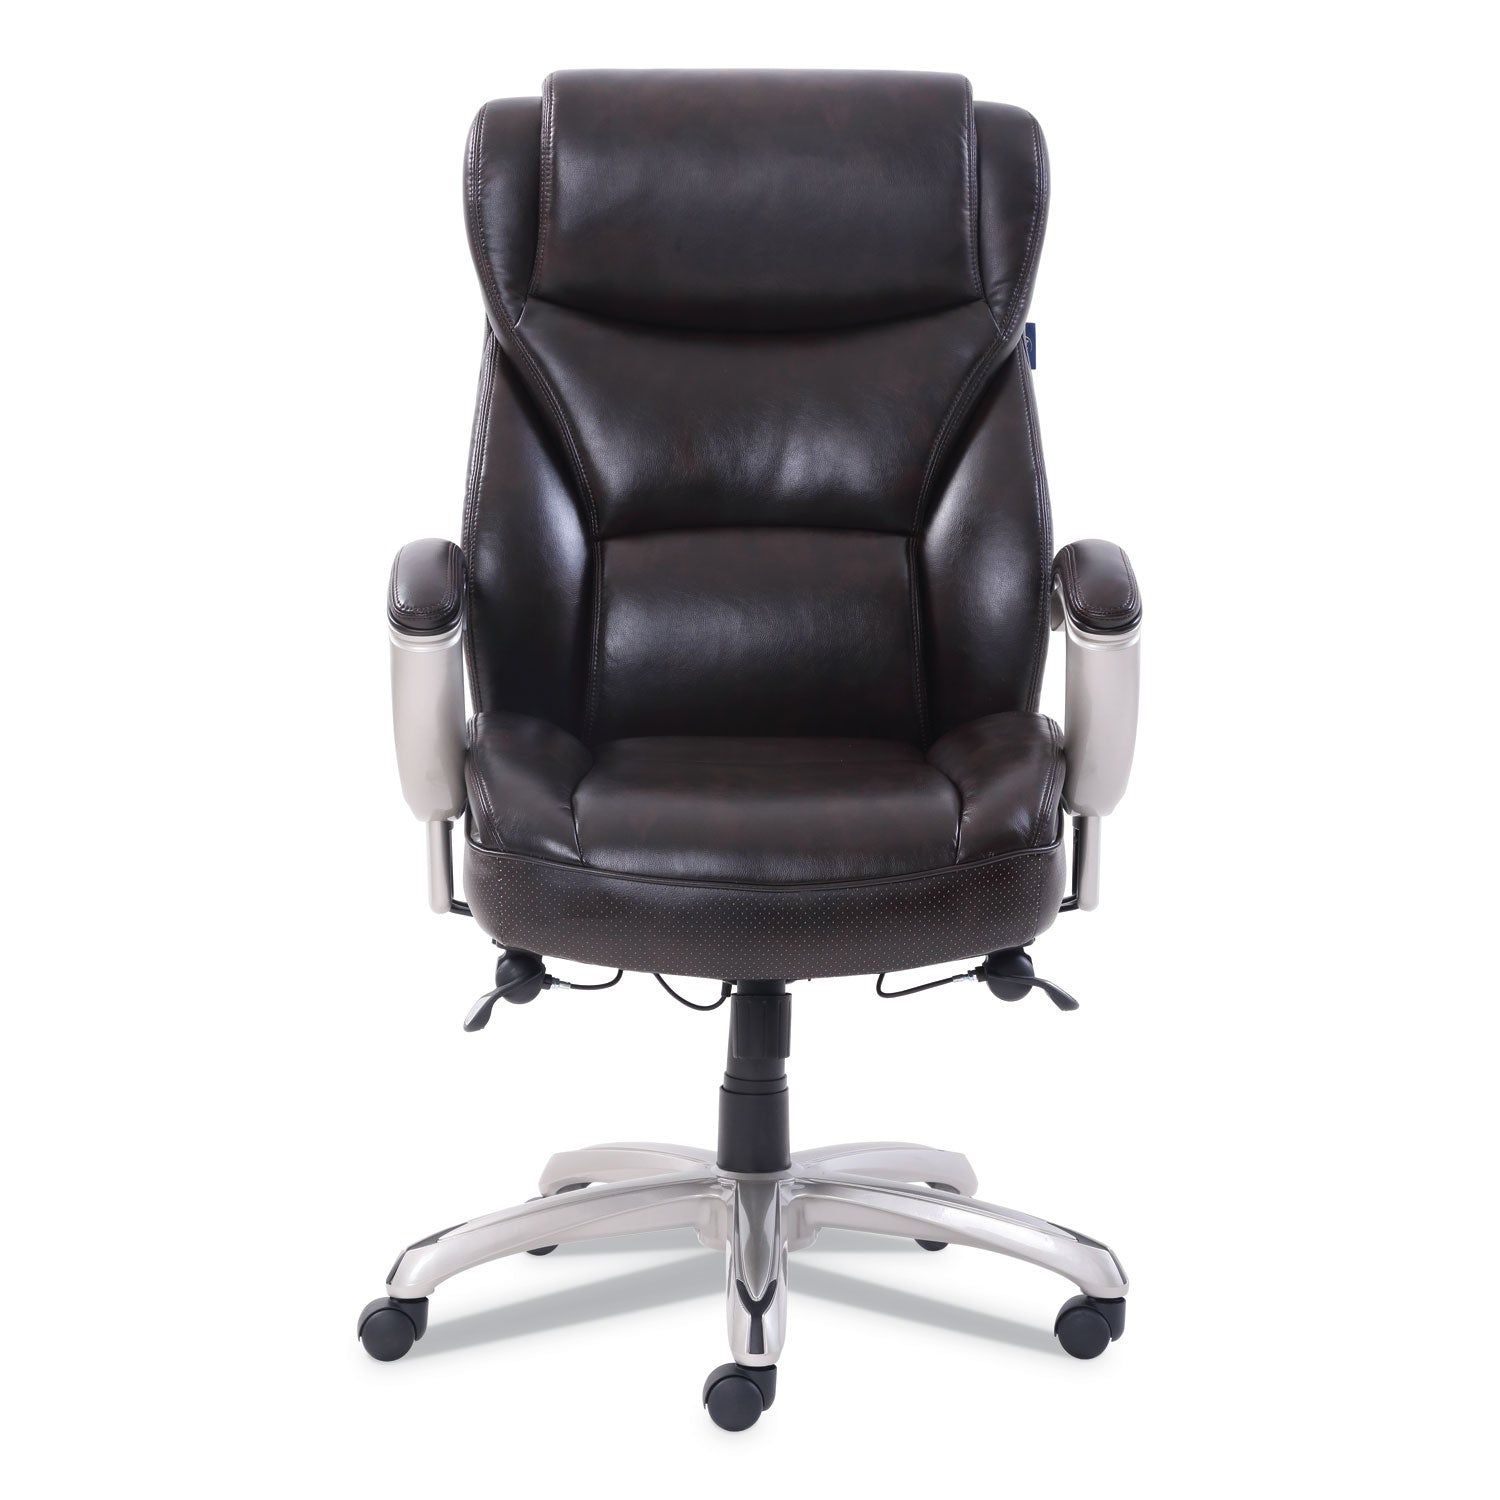 emerson-big-and-tall-task-chair-supports-up-to-400-lb-195-to-225-seat-height-brown-seat-back-silver-base_srj49416brw - 2